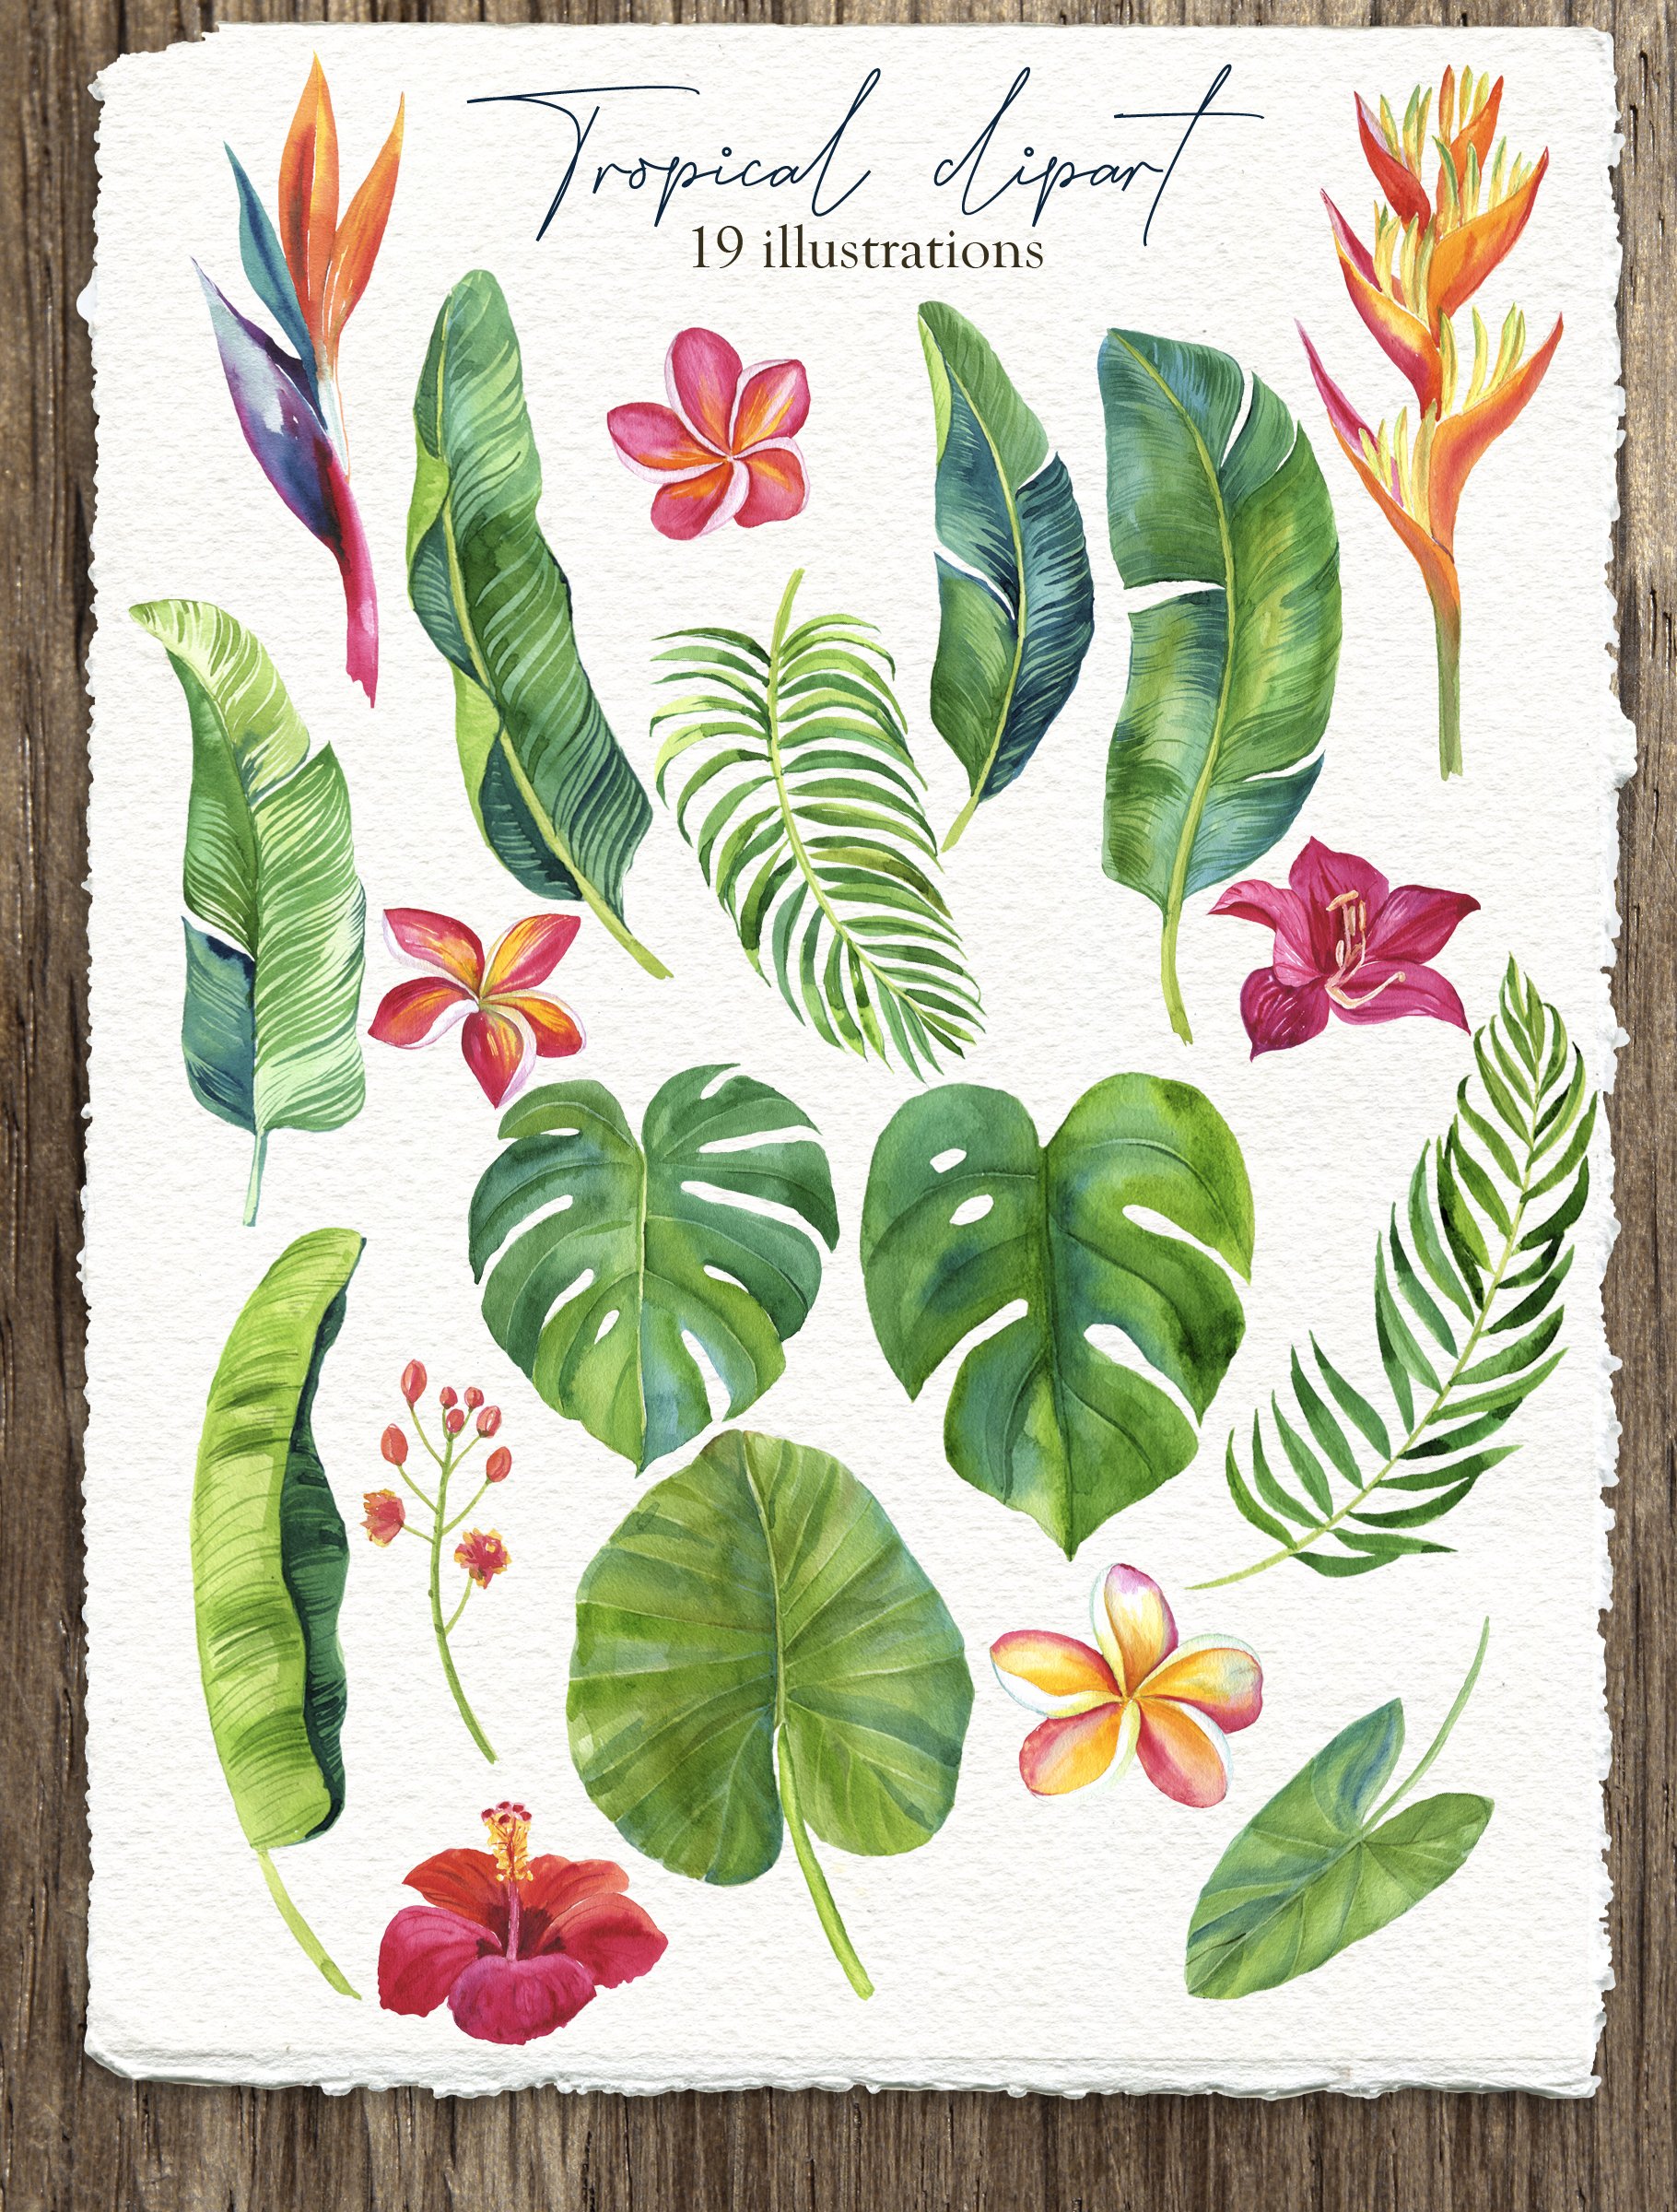 Watercolor painting of tropical leaves and flowers by Leticia Gillett.